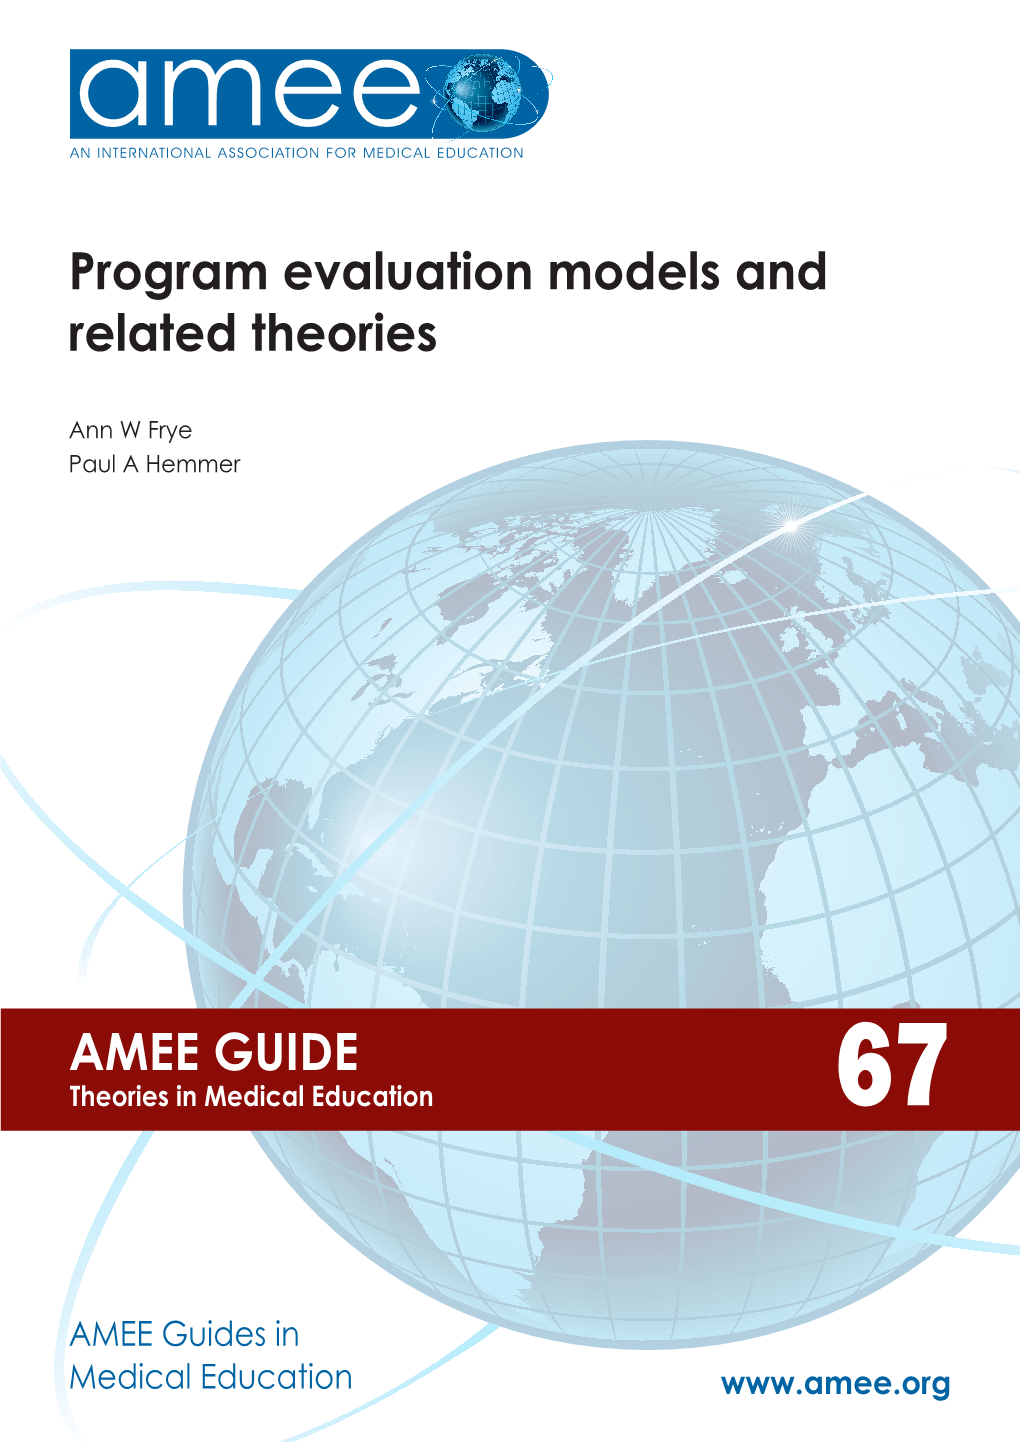 Program Evaluation Models and Related Theories AMEE GUIDE